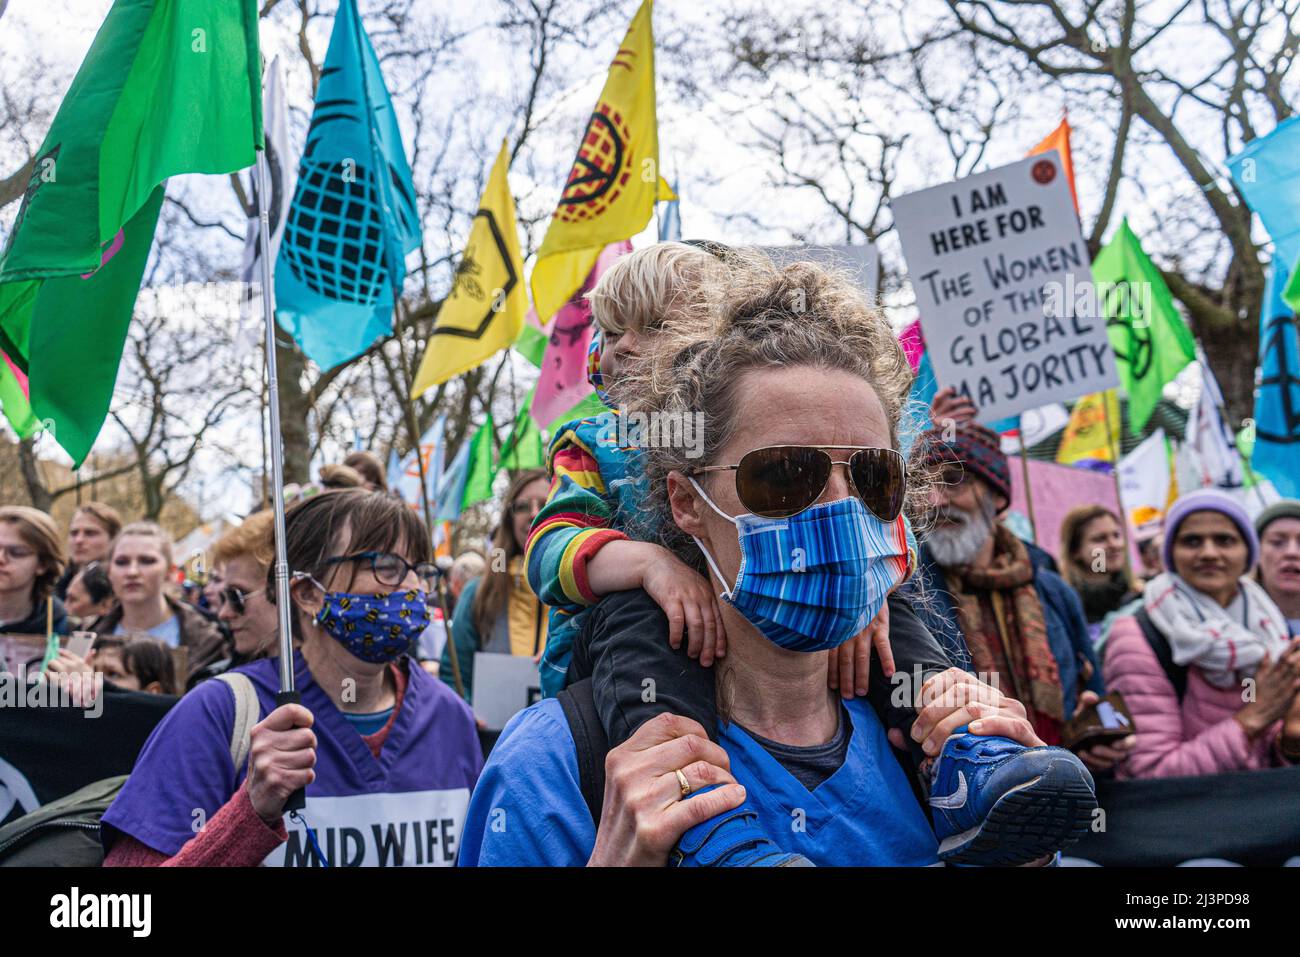 LONDON, UK. 9 April, 2022 . Hundreds of climate activists from Extinction Rebellion gather in Hyde Park before marching central London to demand climate justice and an end to the fossil fuel economy. Extinction Rebellion has vowed to bring more disruptive protests planned around Easter to London. Credit: amer ghazzal/Alamy Live News Stock Photo